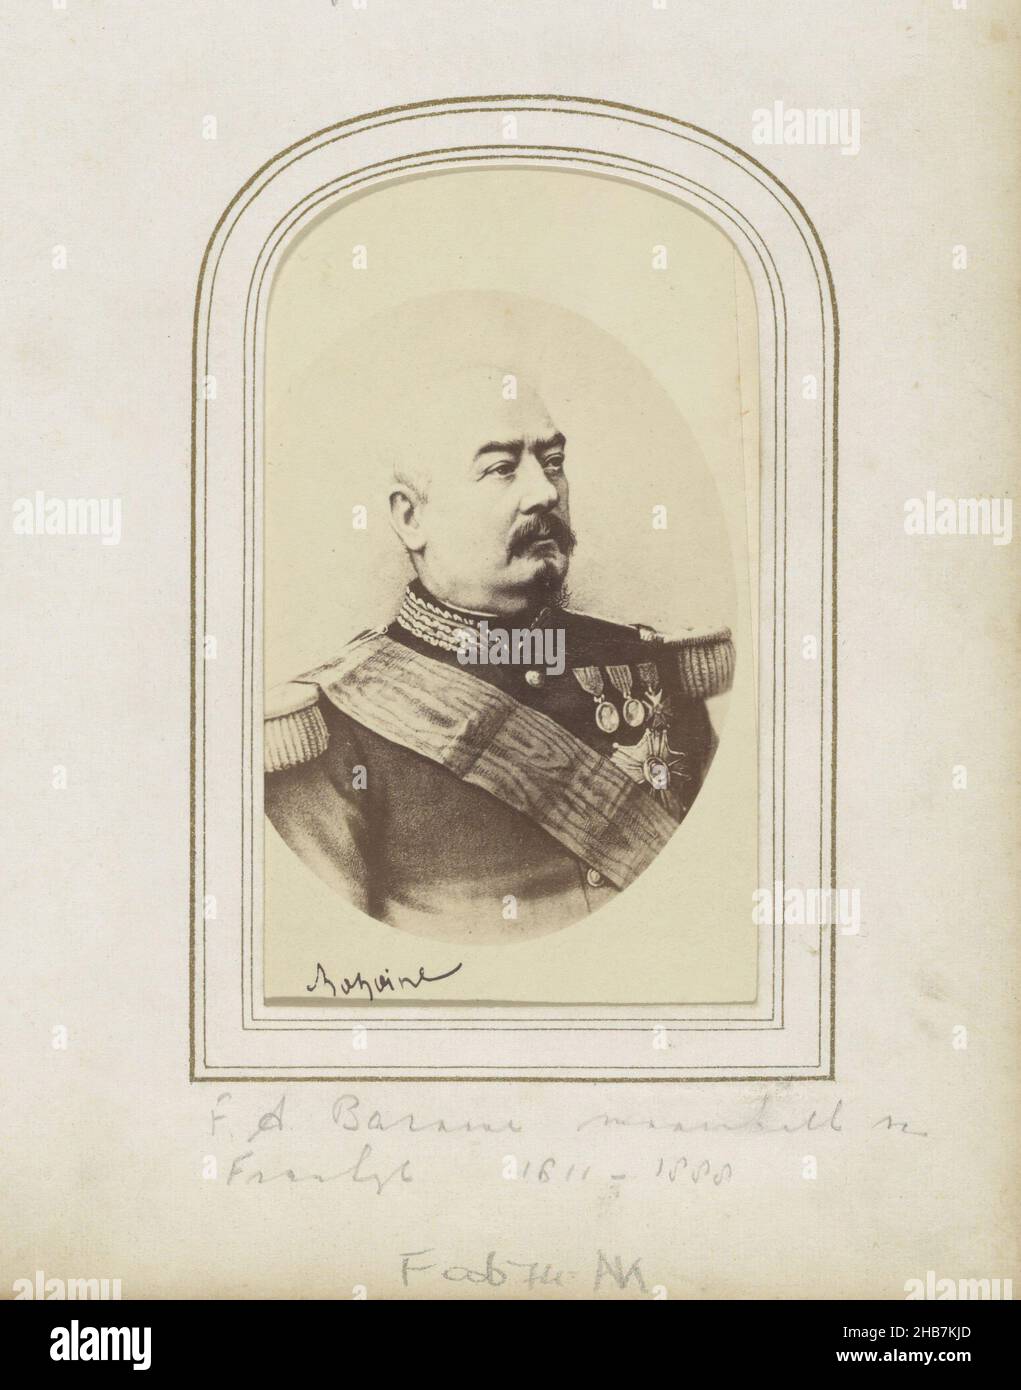 Photoreproduction of (presumably) a signed portrait of François Achille Bazaine, French marshal and general, Bazaine (title on object), Part of Photo Album with 123 cartes-de-visite of members of European royal houses, politicians and well-known persons., anonymous, intermediary draughtsman: anonymous, c. 1860 - c. 1880, cardboard, paper, albumen print, height 94 mm × width 57 mmheight 103 mm × width 62 mm Stock Photo